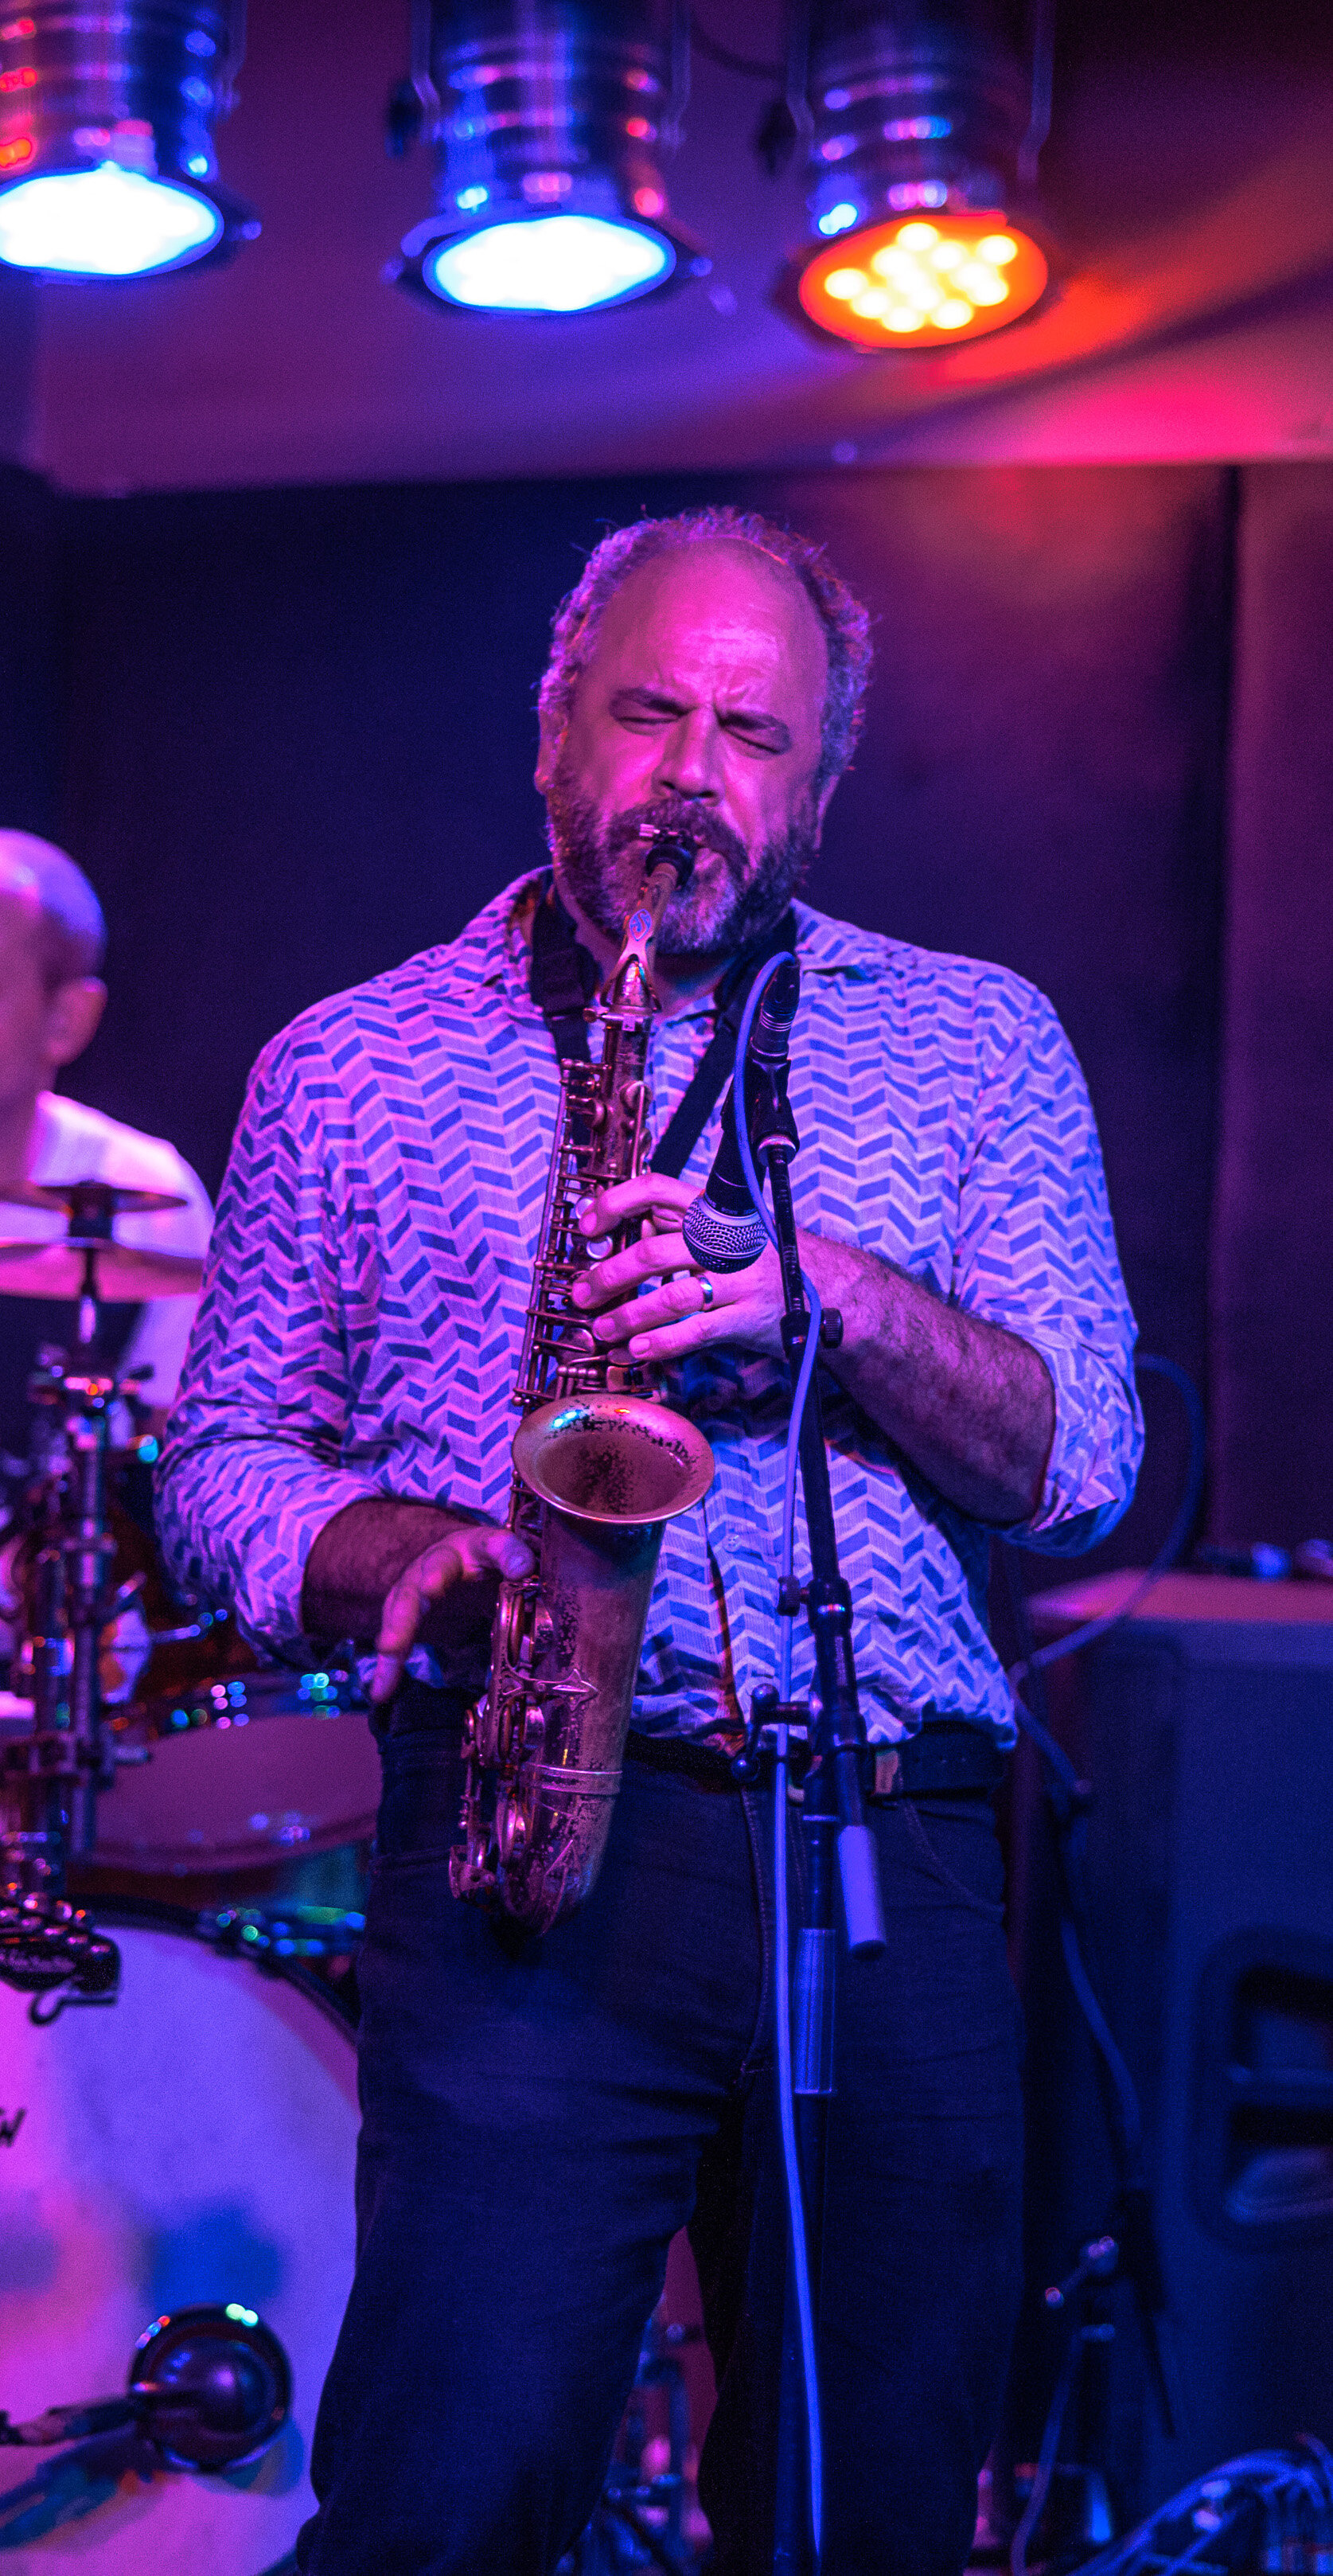 The Author Performing with his own group "Raymond MacDonald and Friends" at The Glad Cafe in Glasgow in 2019. Photographer Brian Hartley.